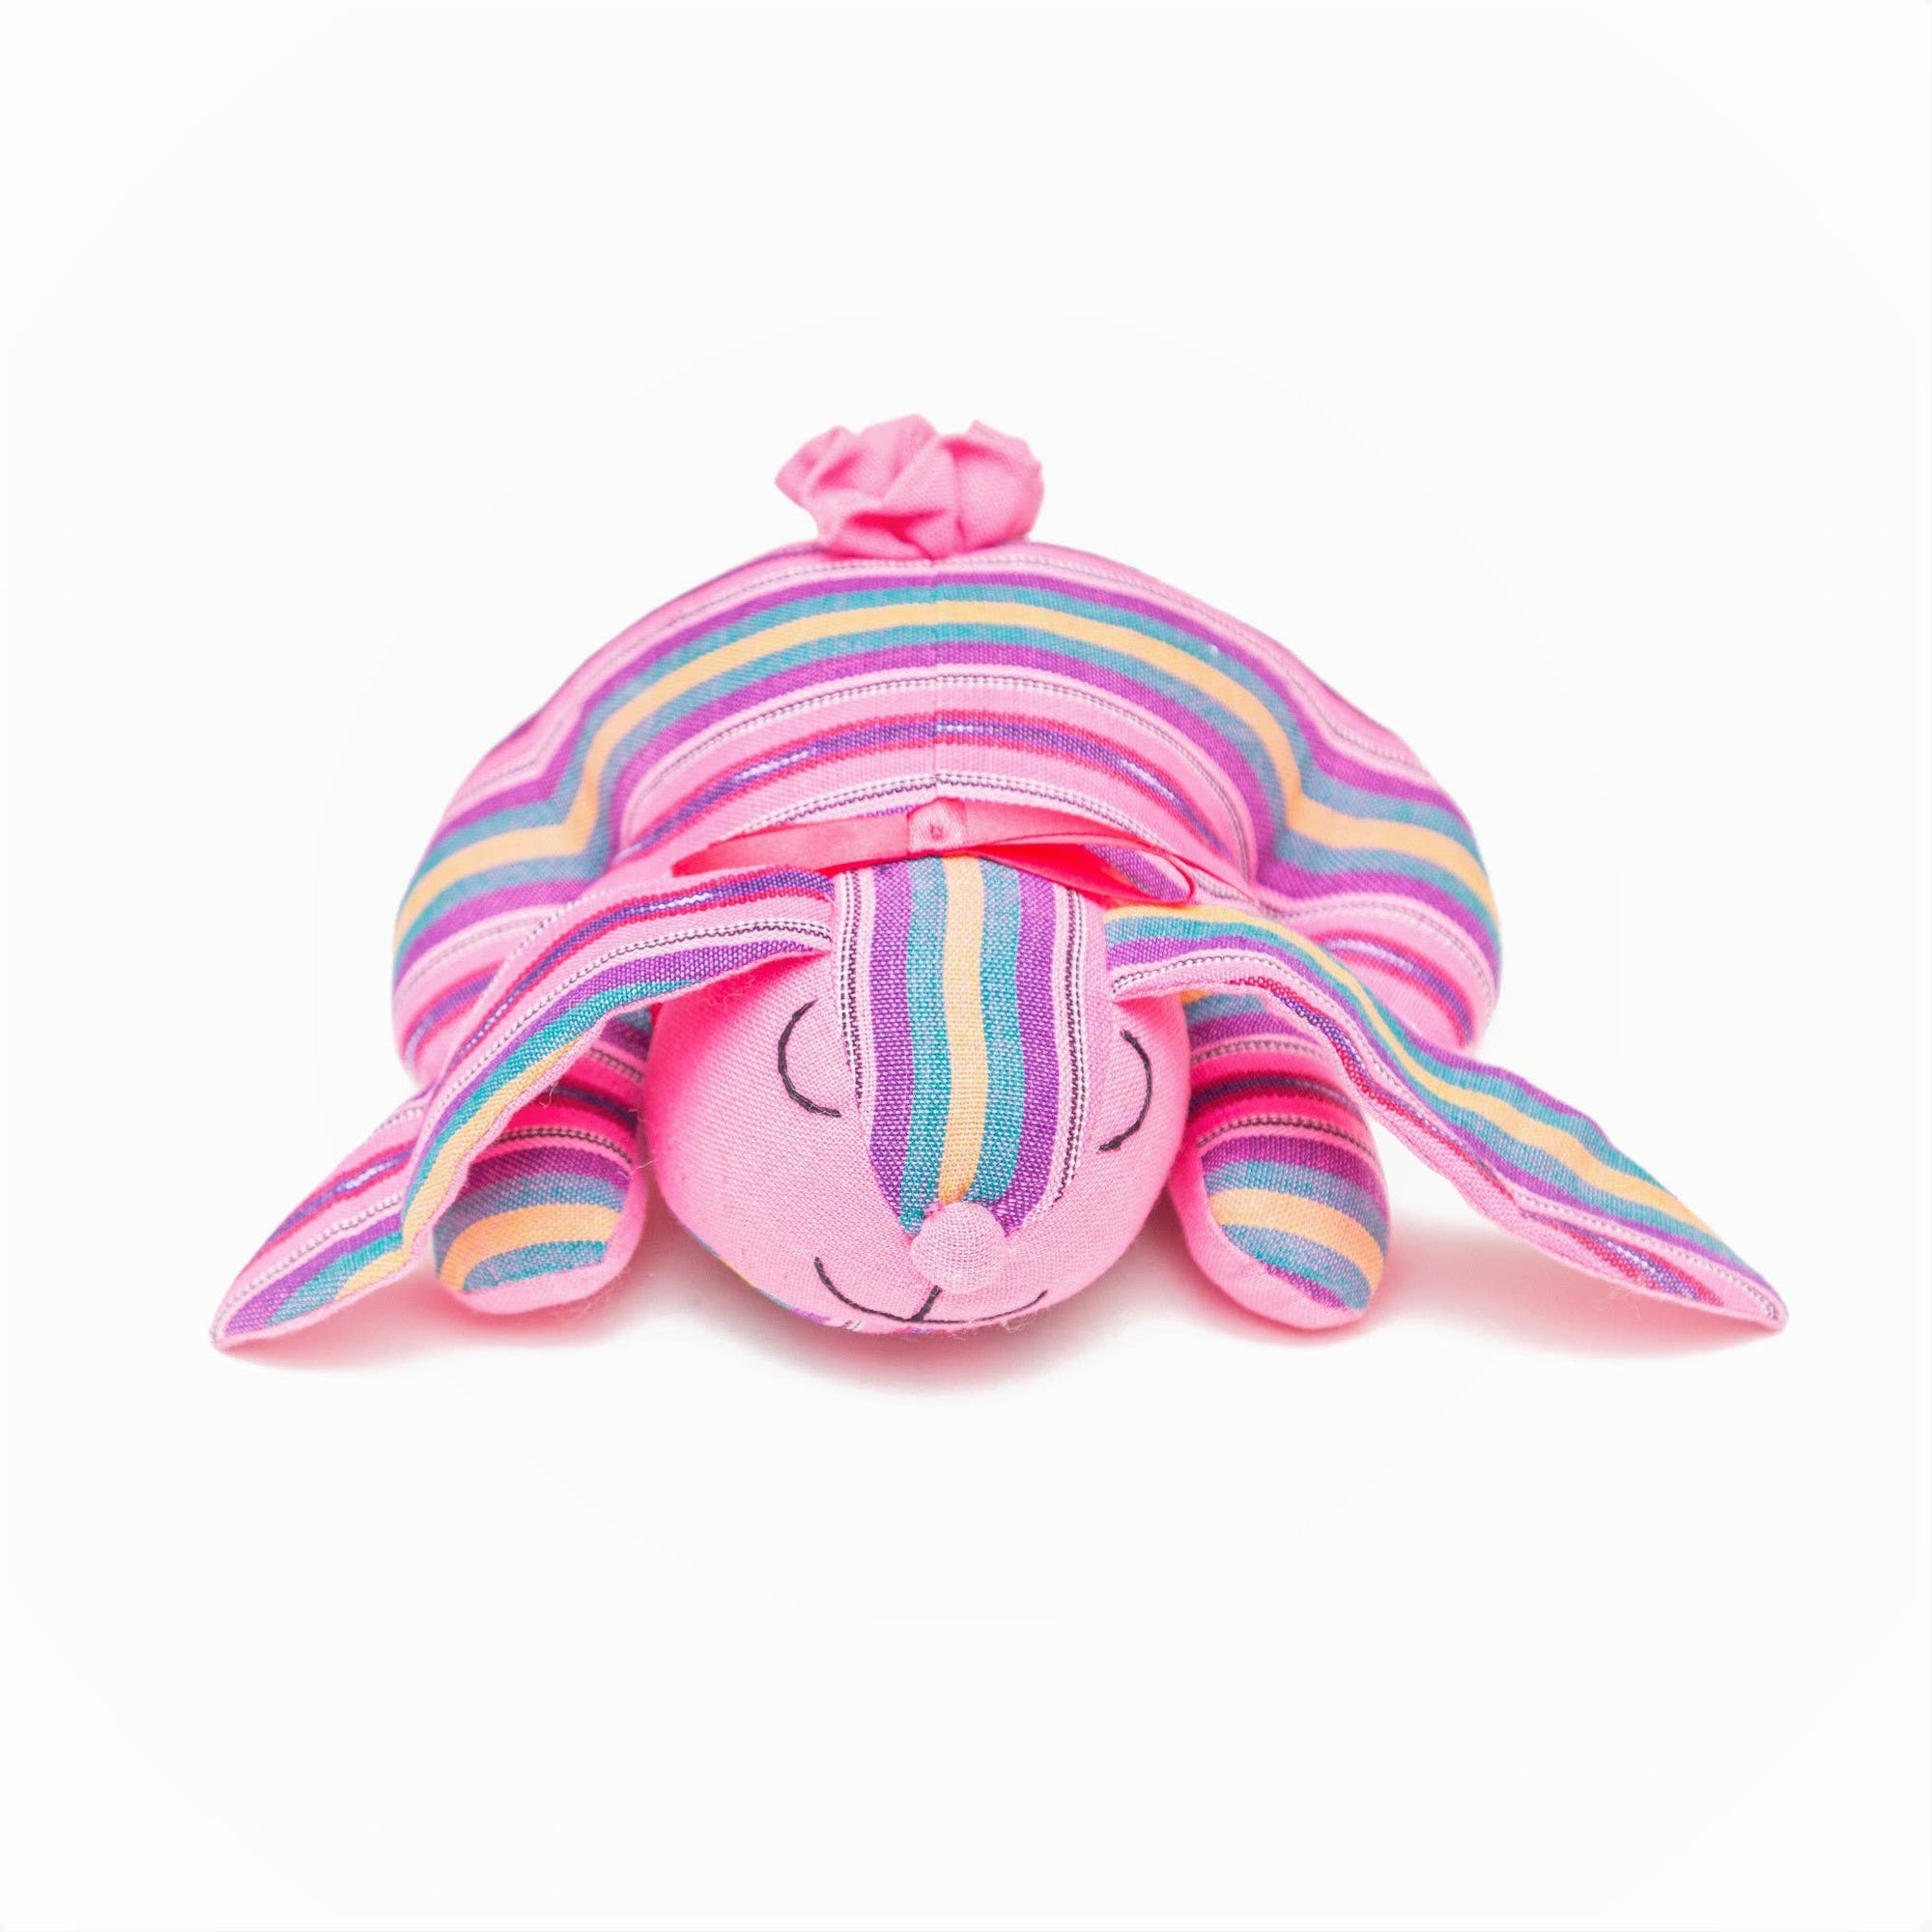 Snuggle Bunny Pink (IS)